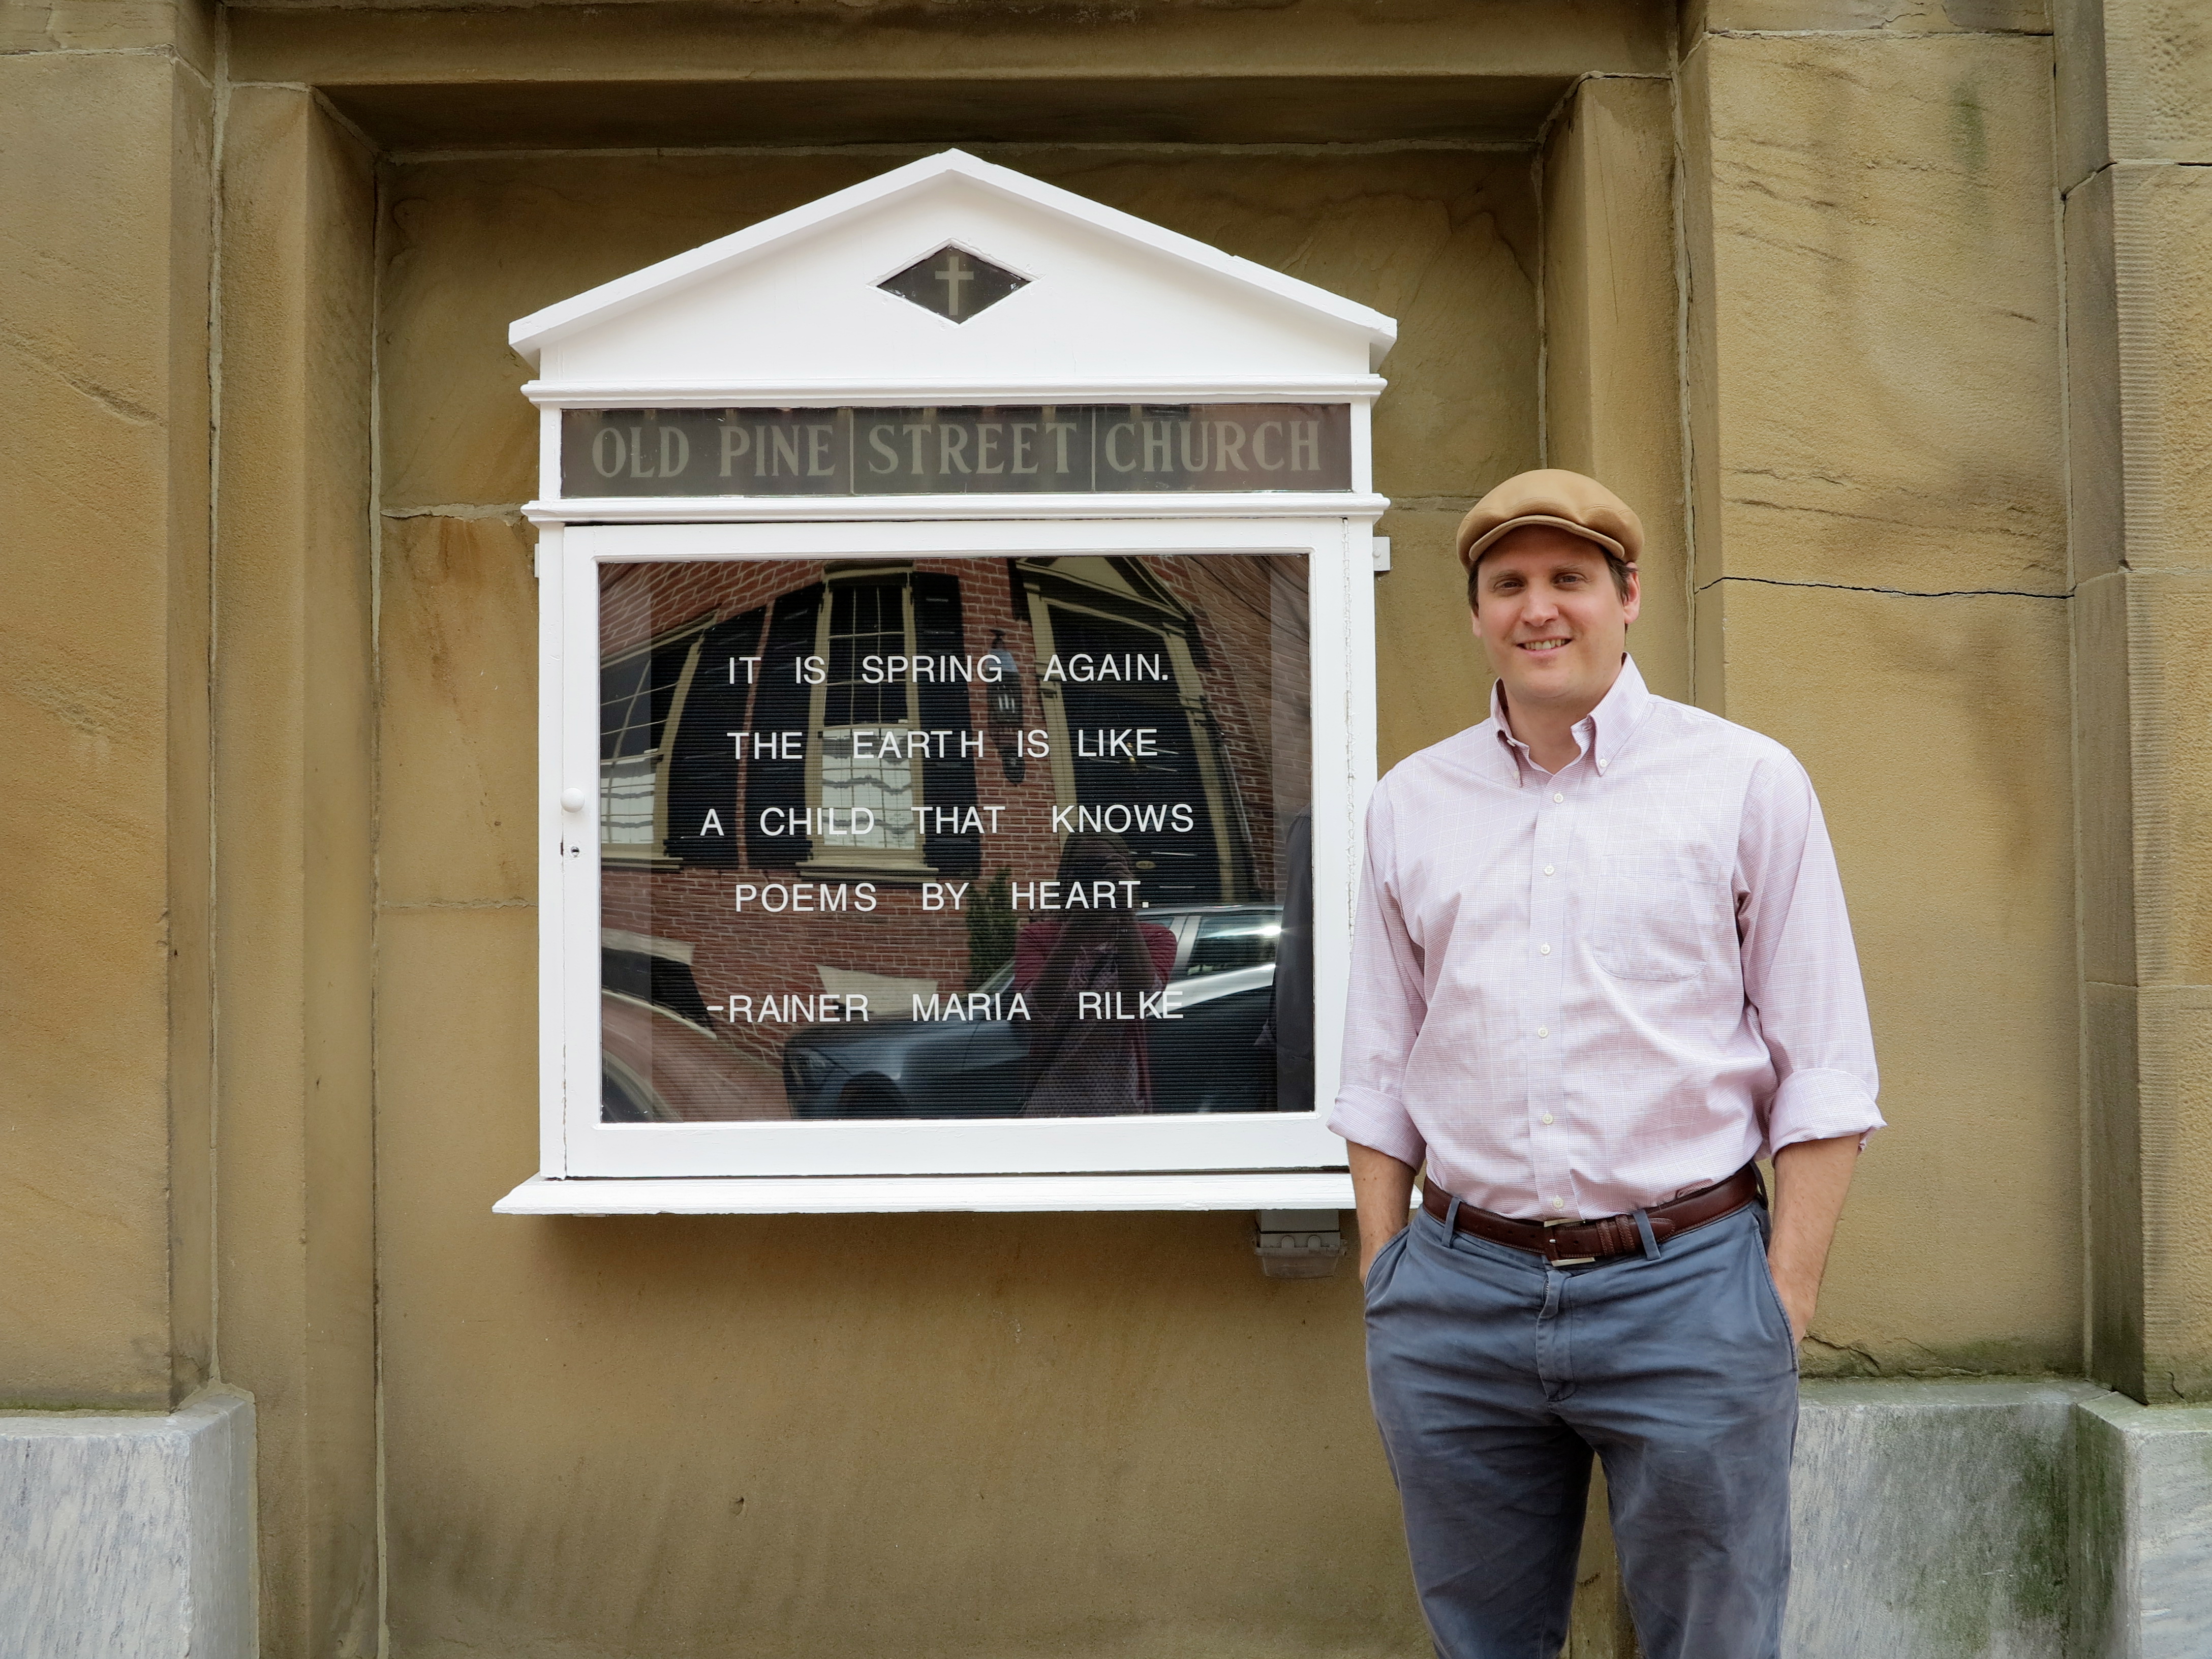 Rev. Jason Ferris and the Old Pine Street Church signboard